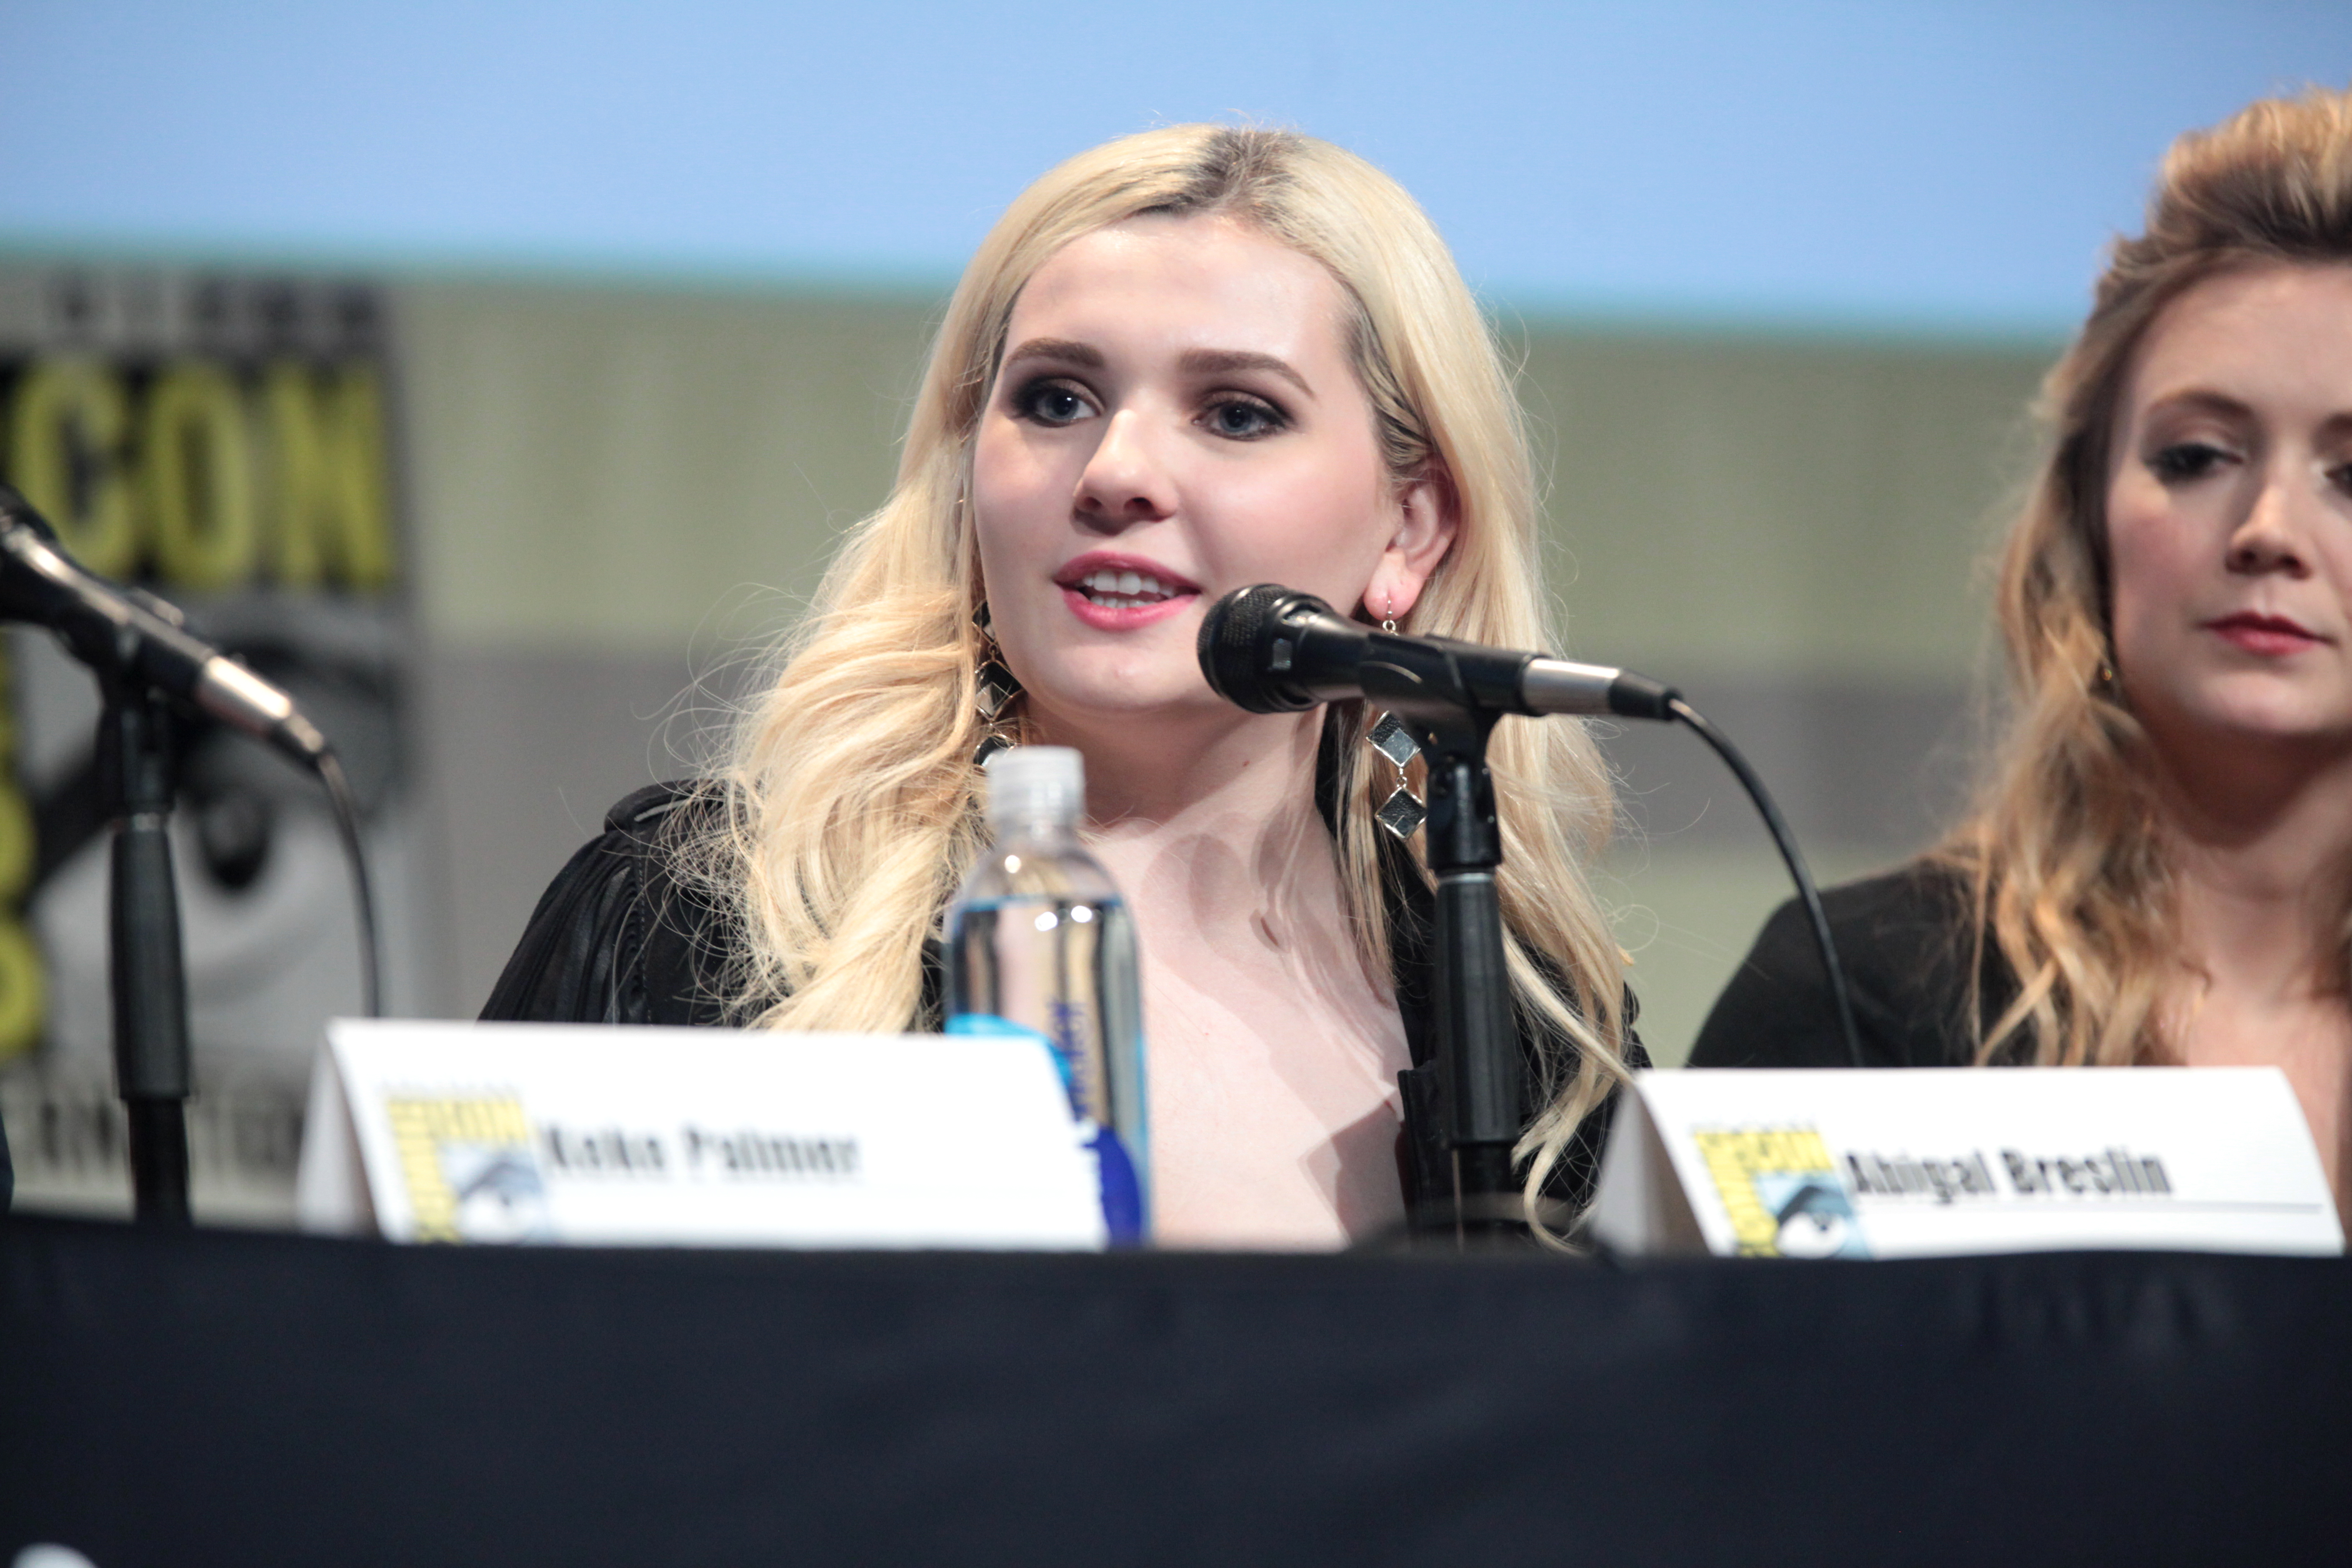 Abigail Breslin speaking at the 2015 San Diego Comic Con International, for "Scream Queens." Photo: Wikimedia Commons.